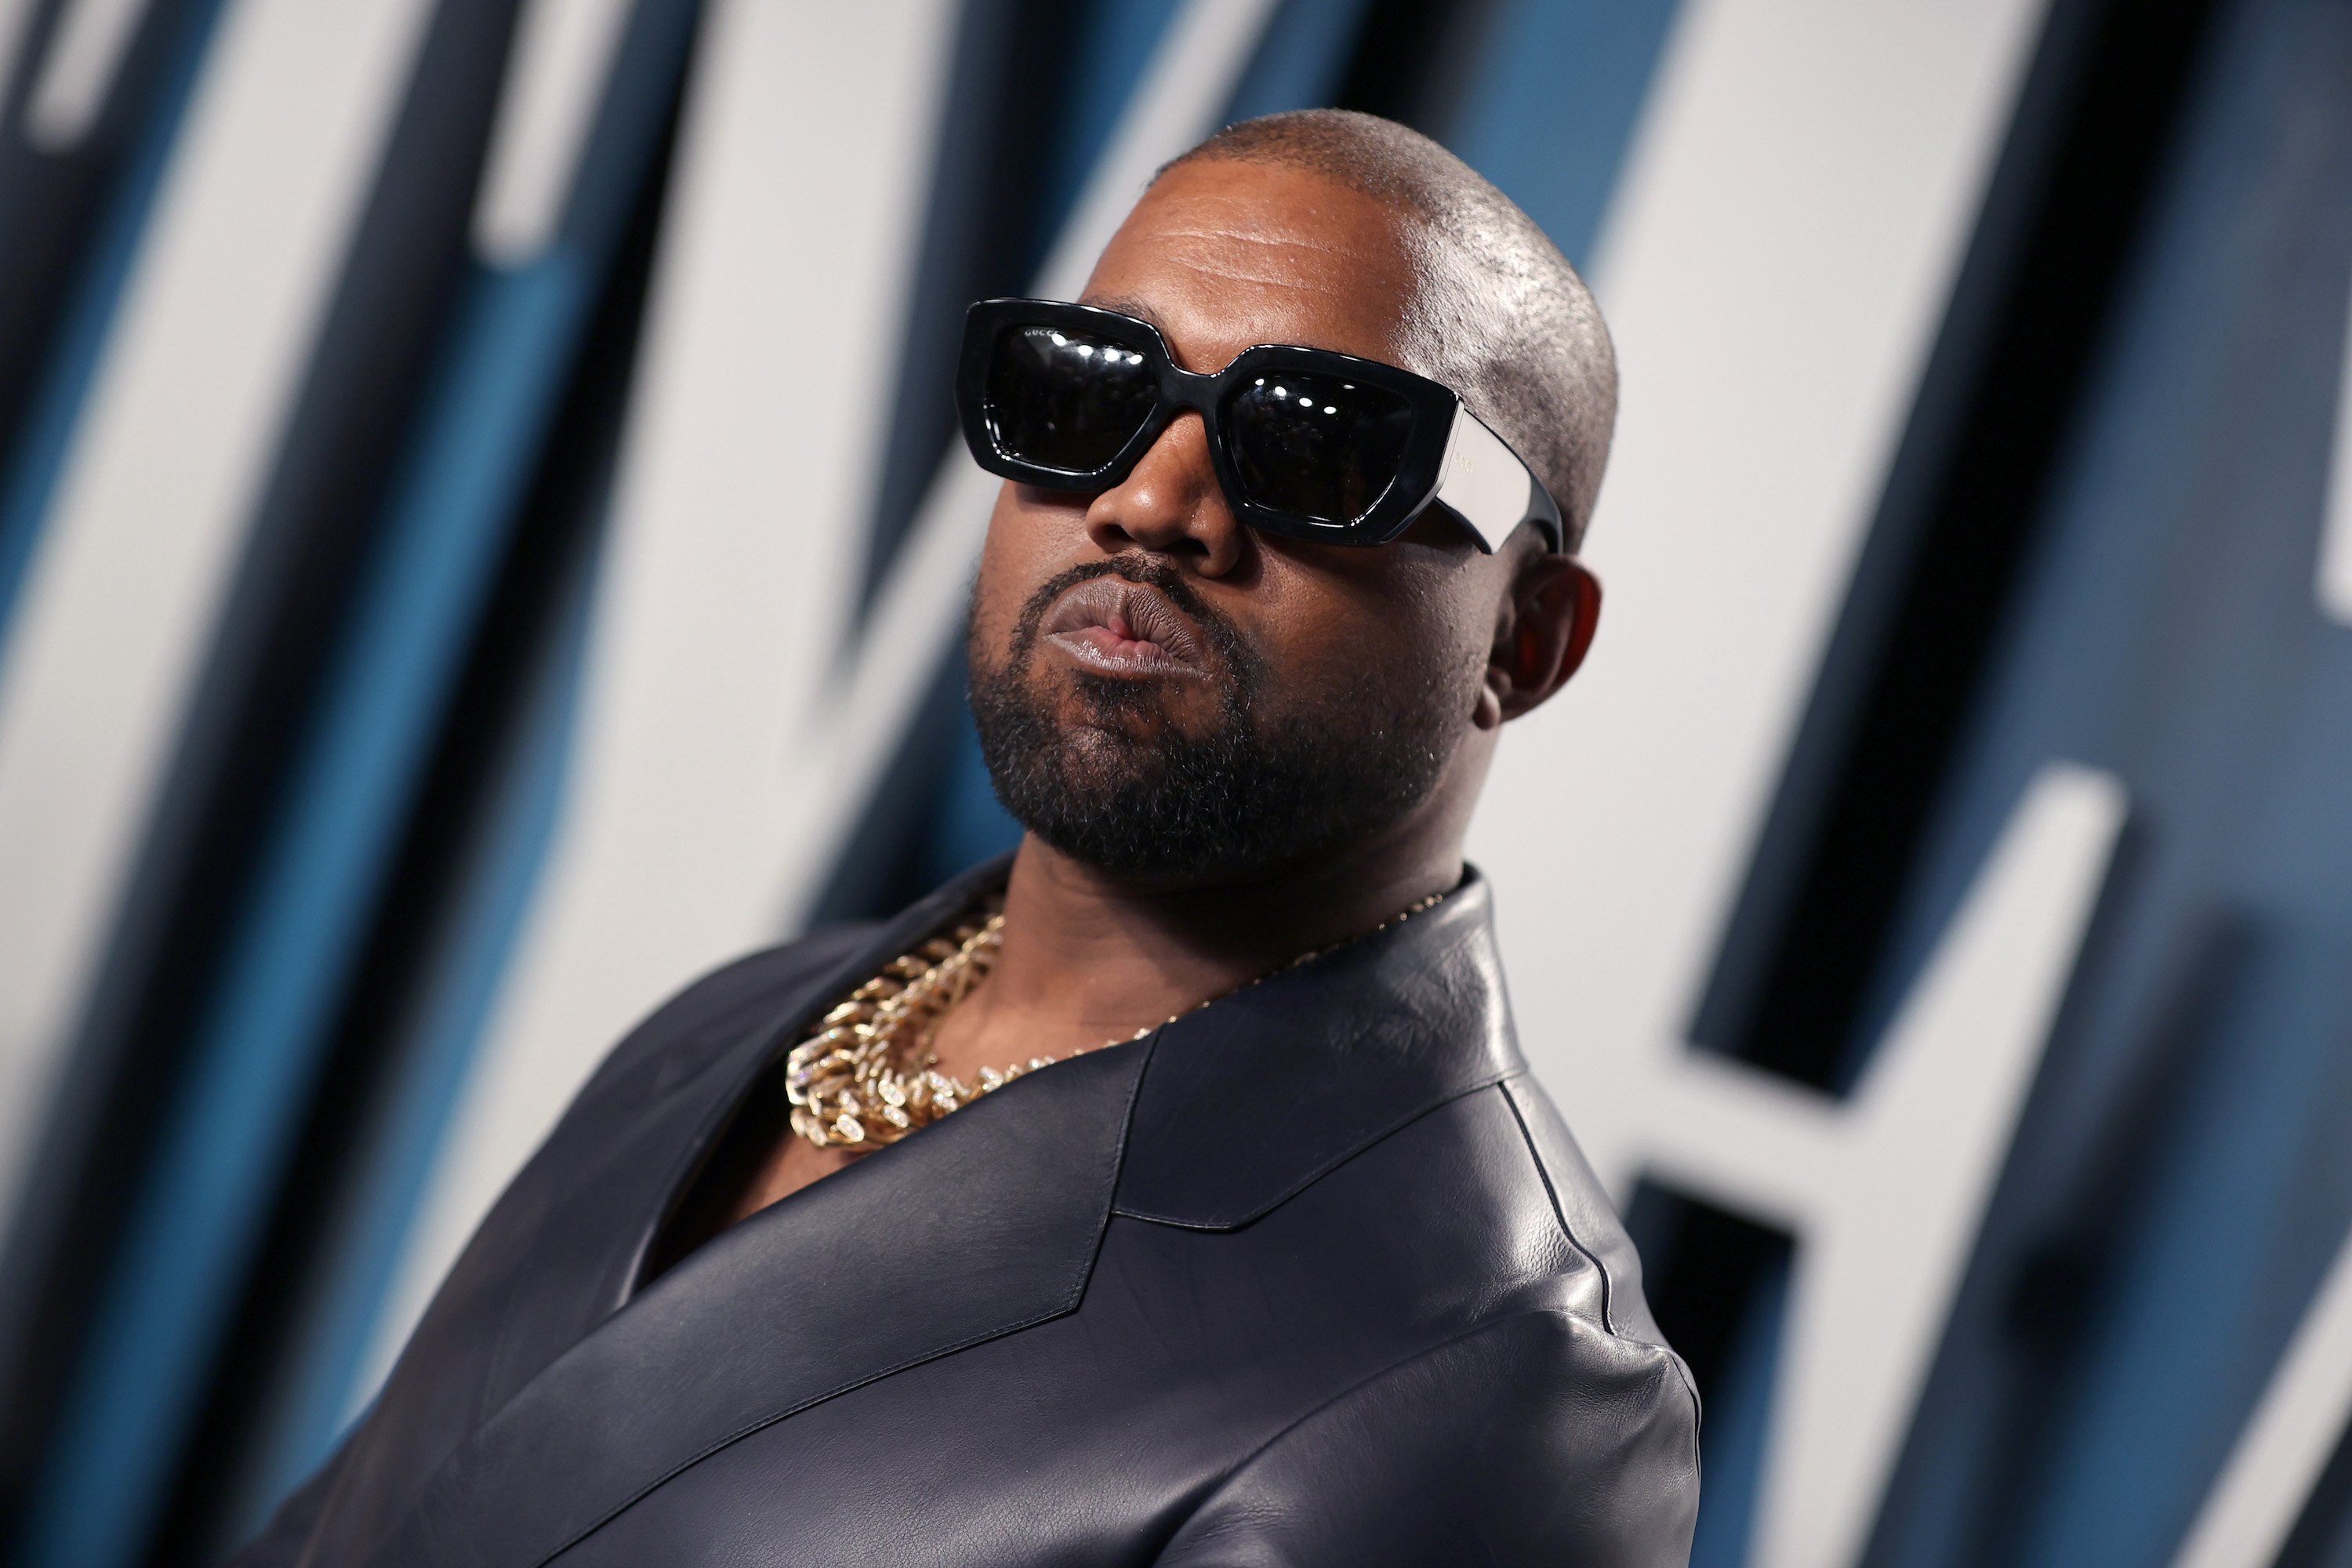 Kanye West, who admitted Bad Bunny is his biggest competition, wearing sunglasses and a black jacket